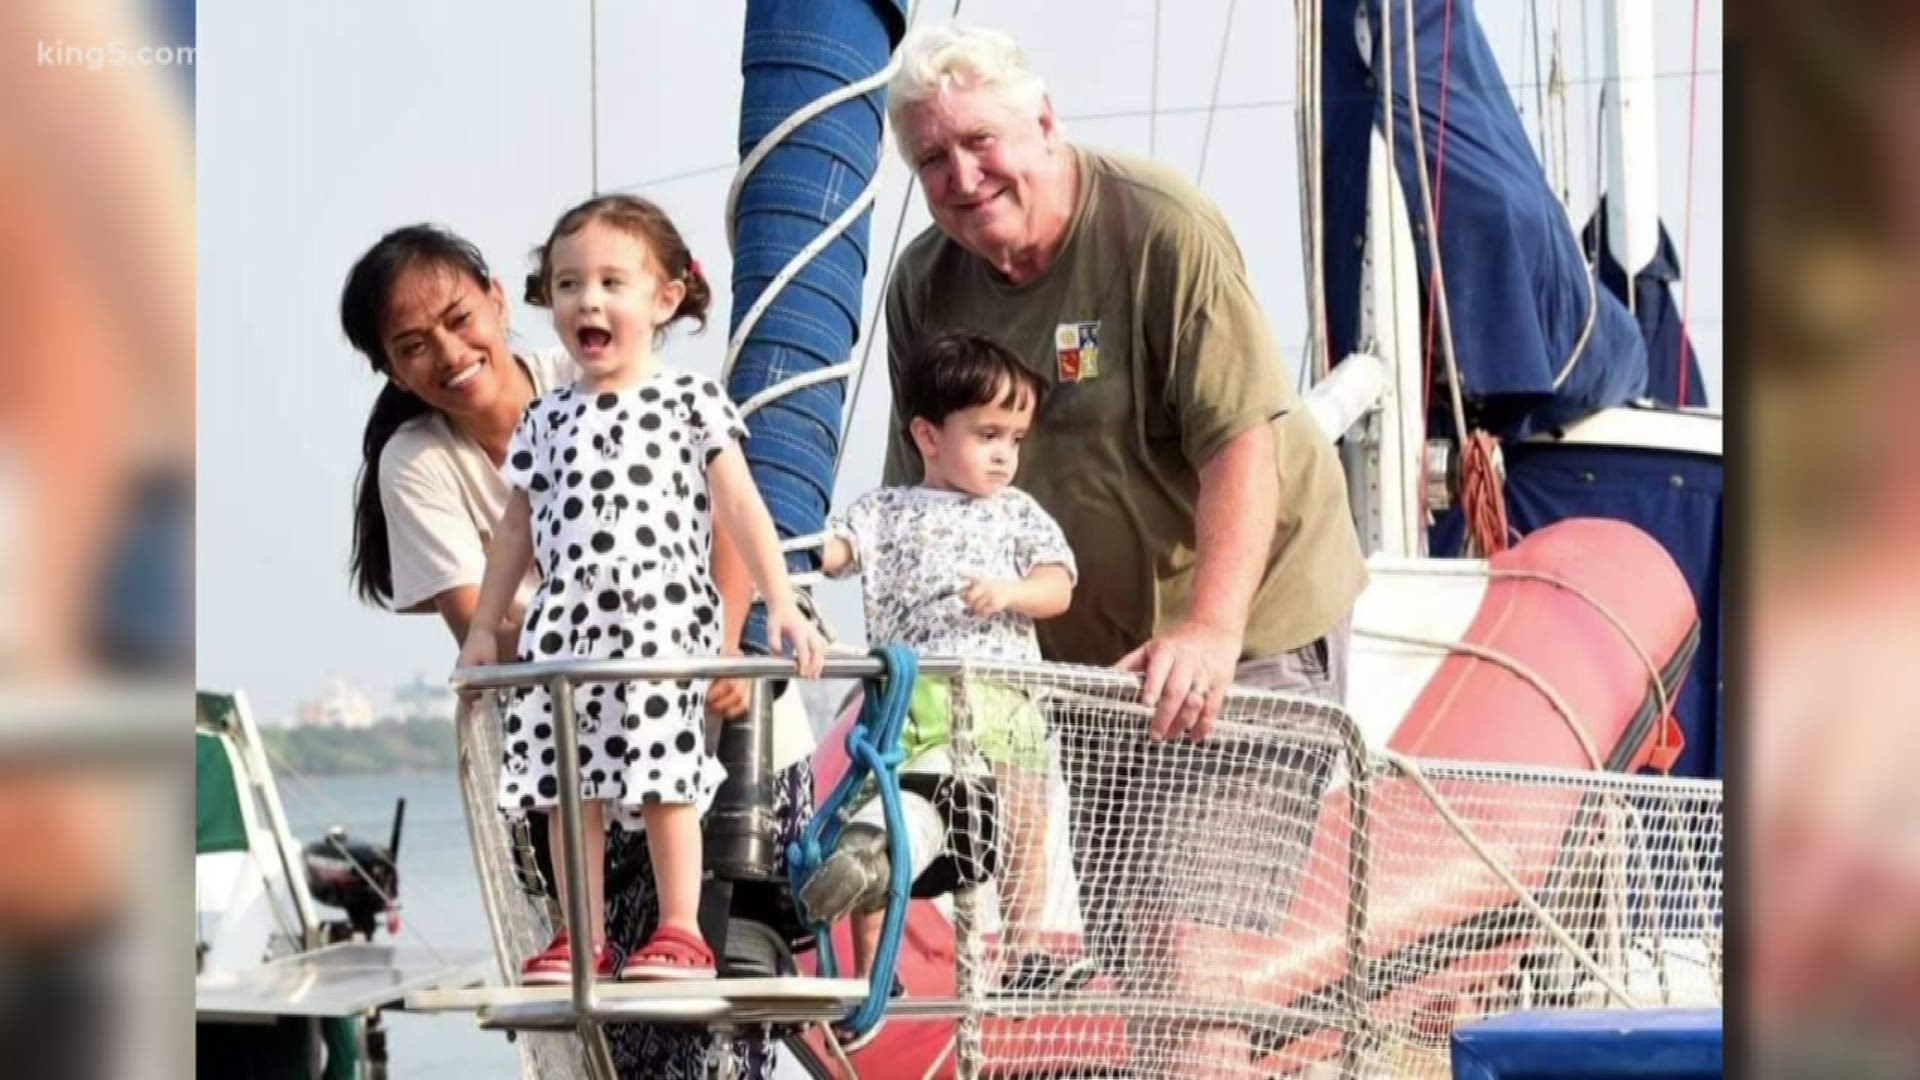 Robert Bechler, his wife, and their 3-year-old twins are now mapping out a new future after a shipwreck off Sudan. KING 5's Vanessa Misciagna reports.